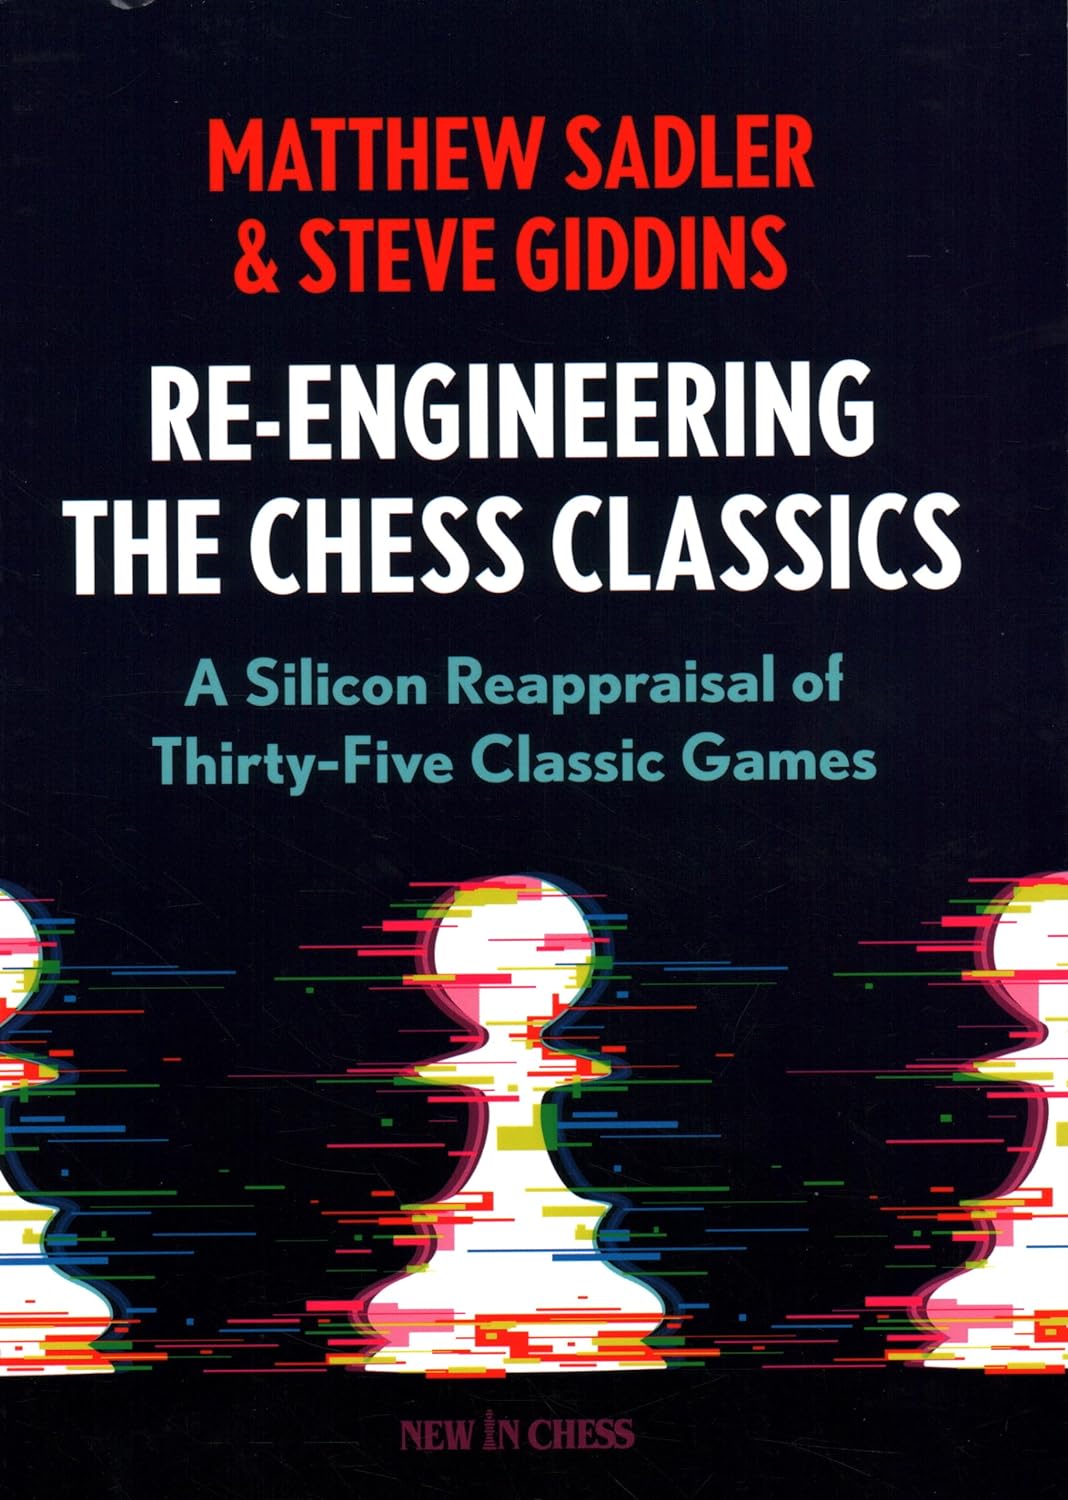 Re-Engineering The Chess Classics: A Silicon Reappraisal of Thirty-Five Classic Games, FM Steve Giddins, New in Chess (31 May 2023), ISBN-13 ‏ : ‎ 978-9083311265.